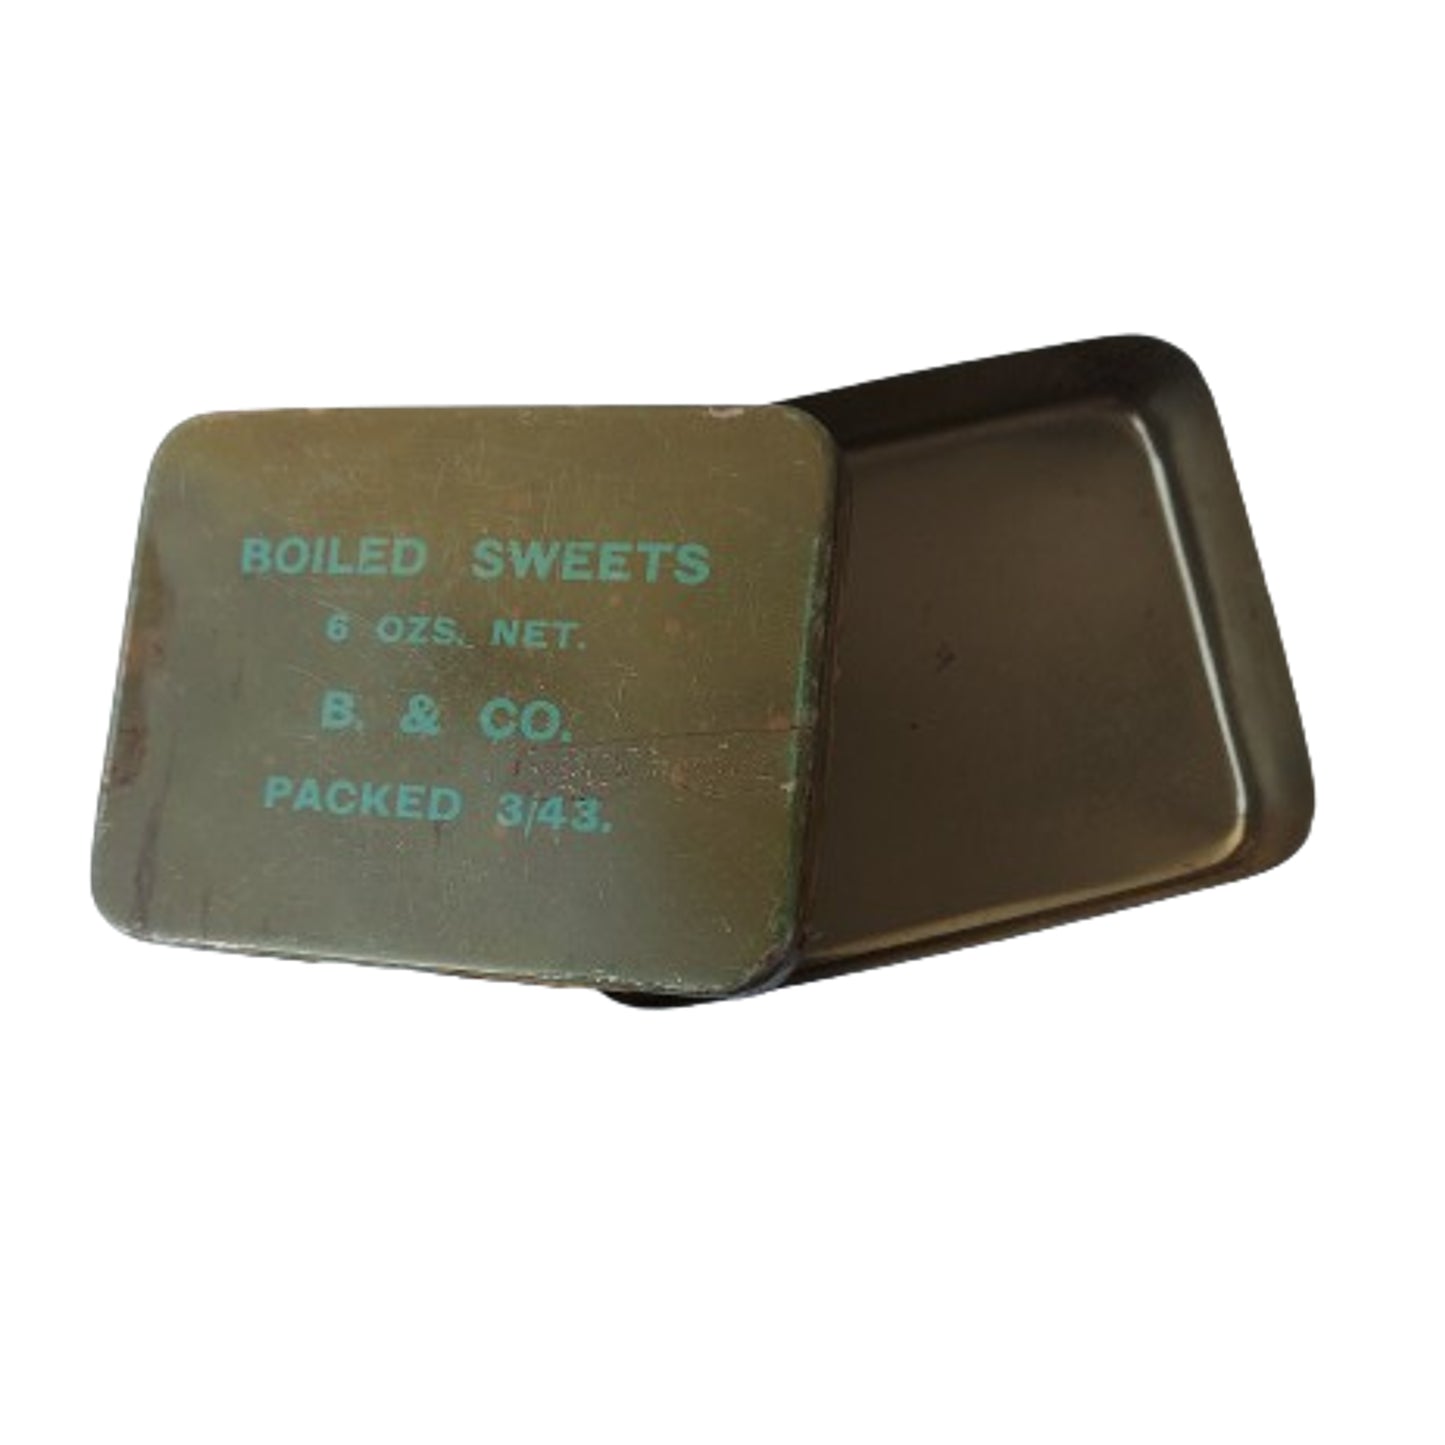 WW2 Canadian -British Boiled Sweets Ration Tin